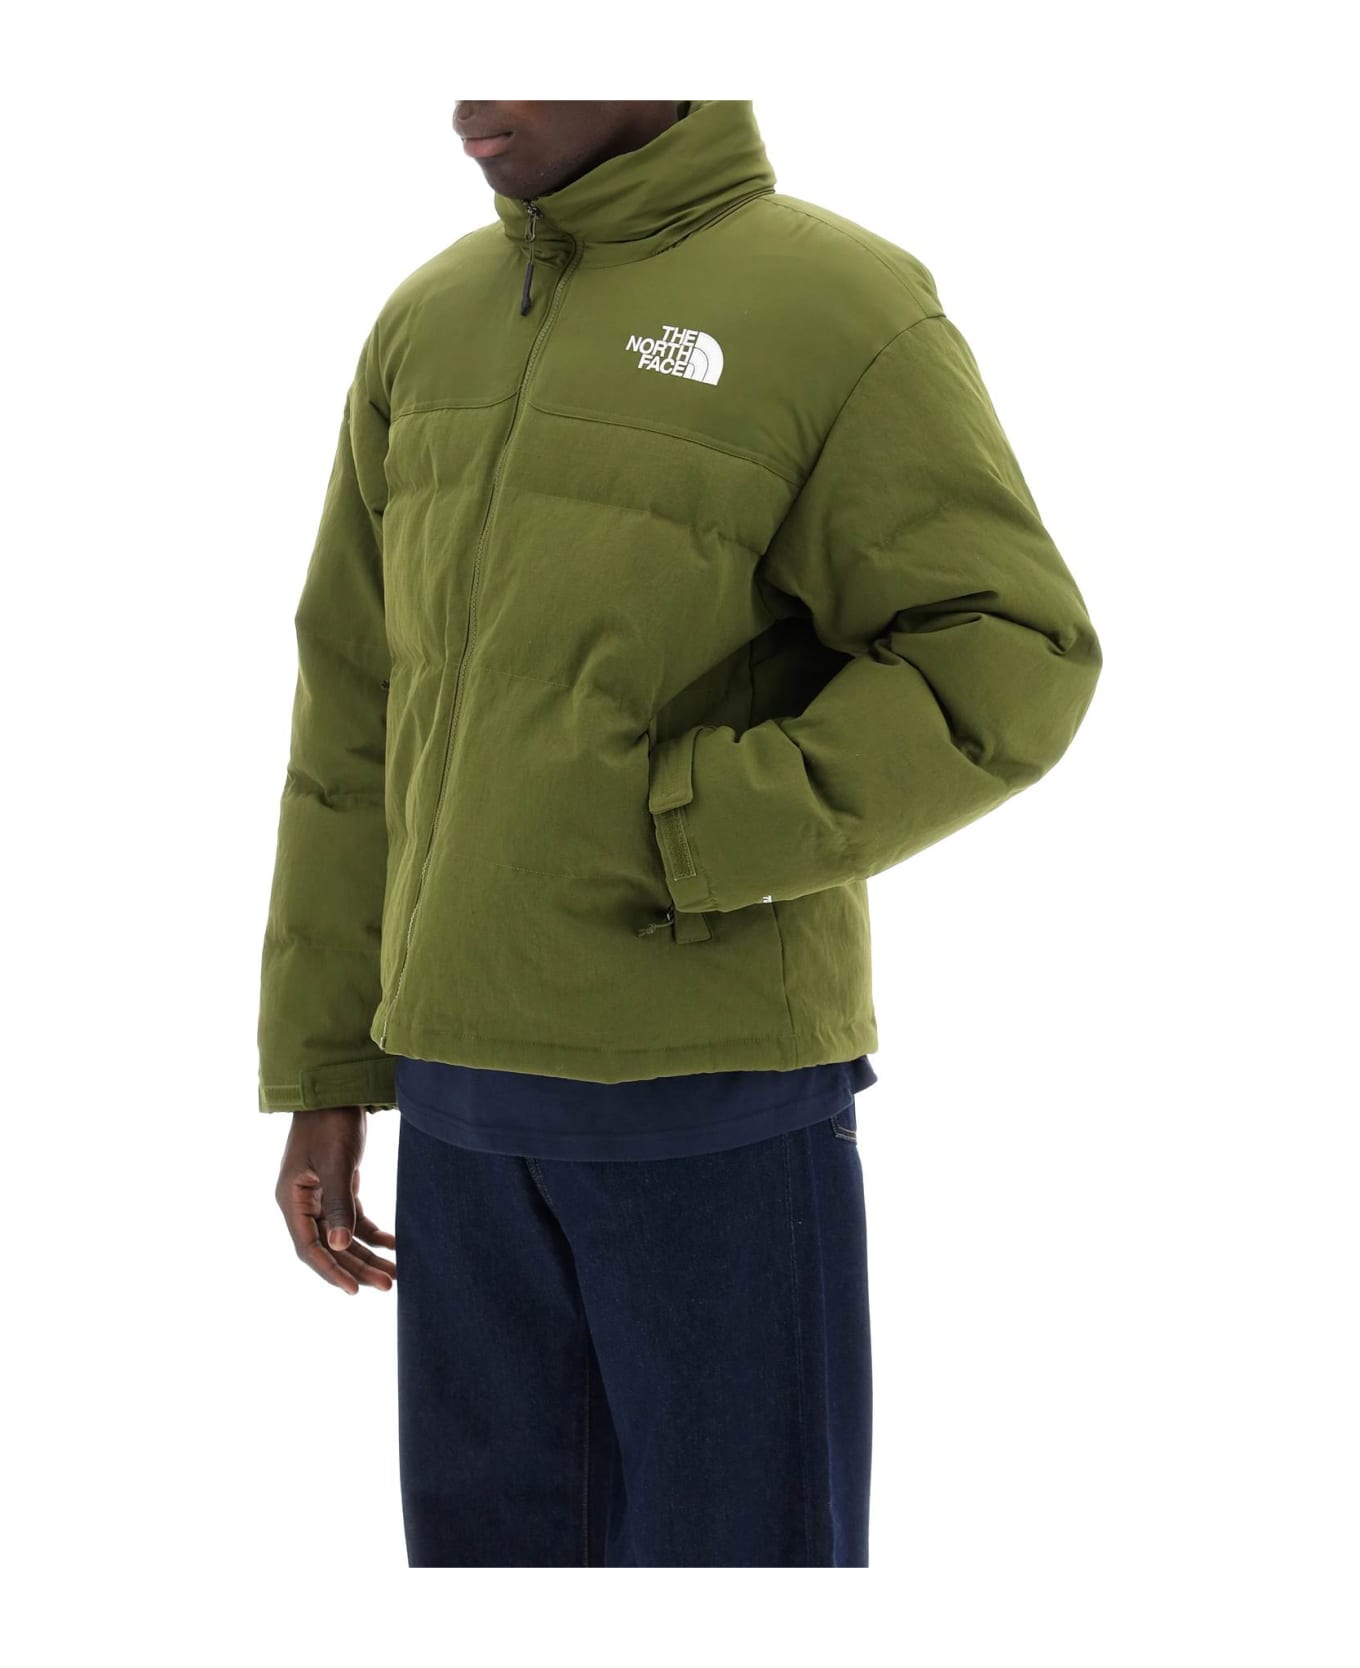 The North Face 1992 Ripstop Nuptse Down Jacket - FOREST OLIVE (Green) ダウンジャケット